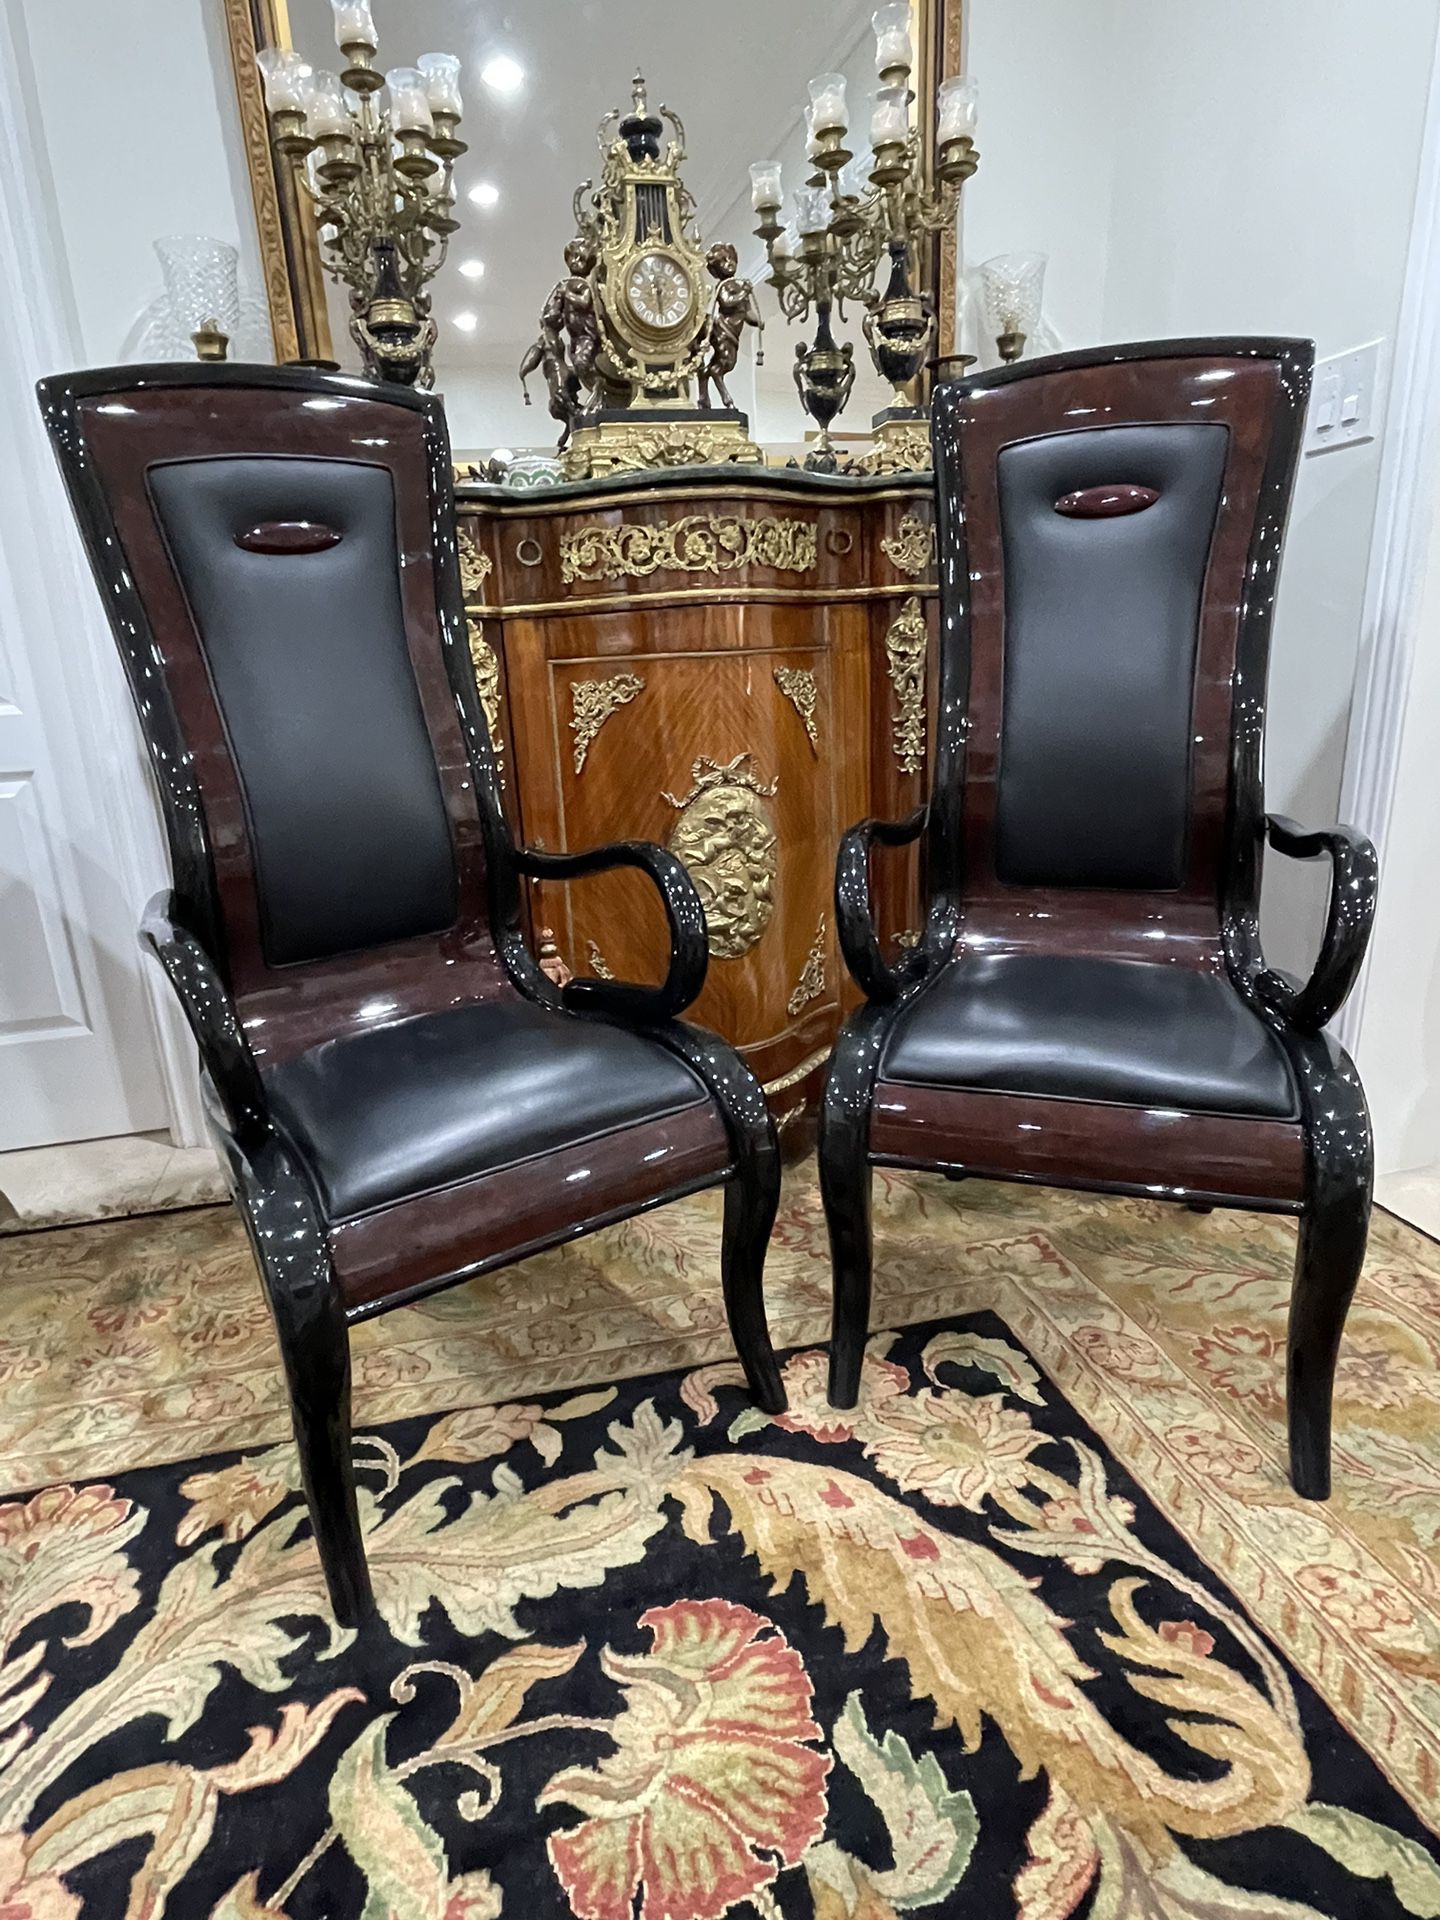 A Pair of Stunning Vintage Leather - Lacquer Solid Wood Chairs $200 Each🌷